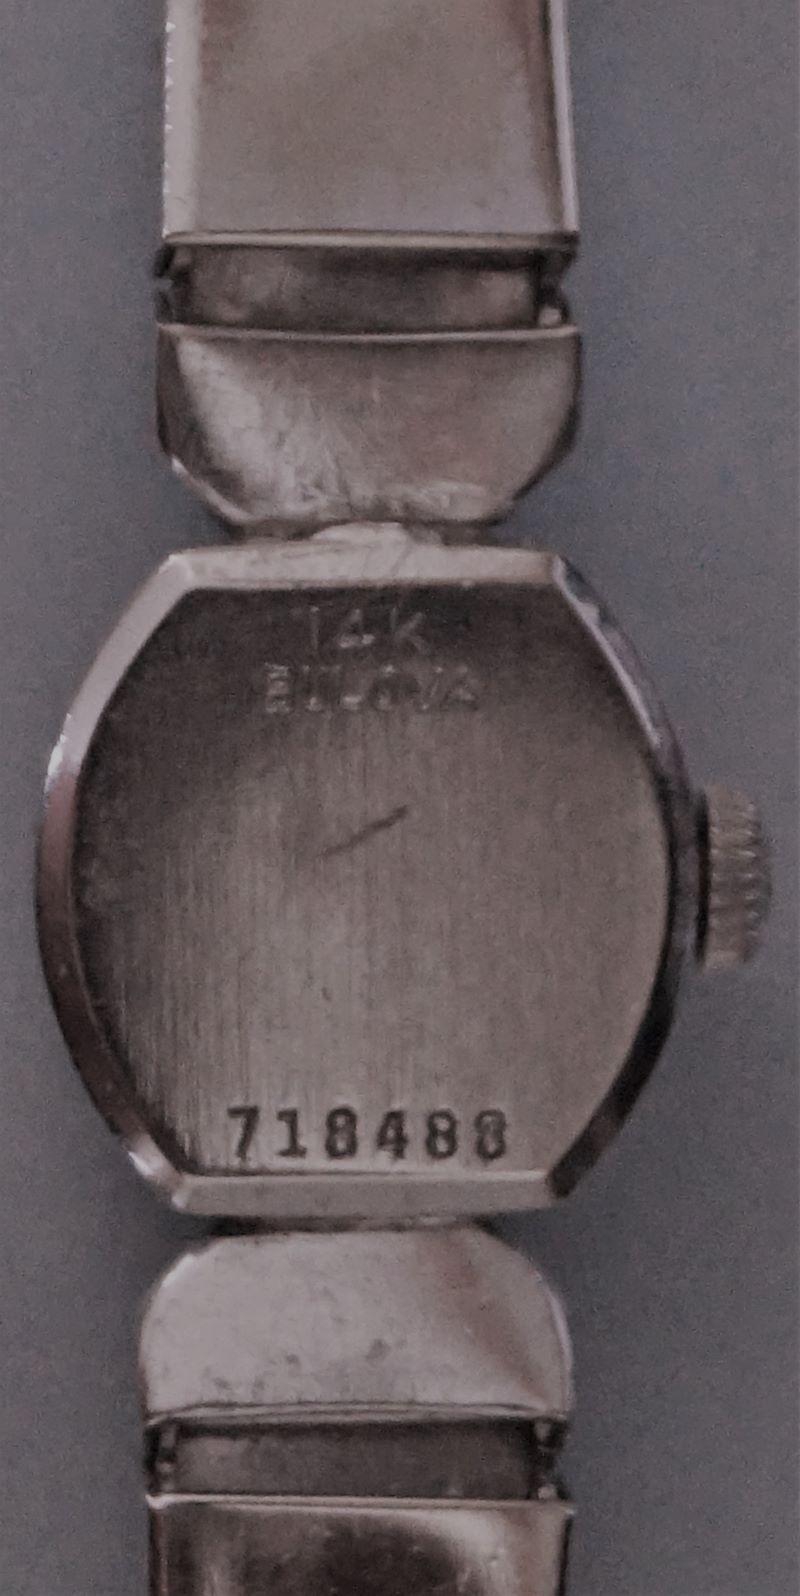 Watch case with lugs, band obscures lugs and attachment